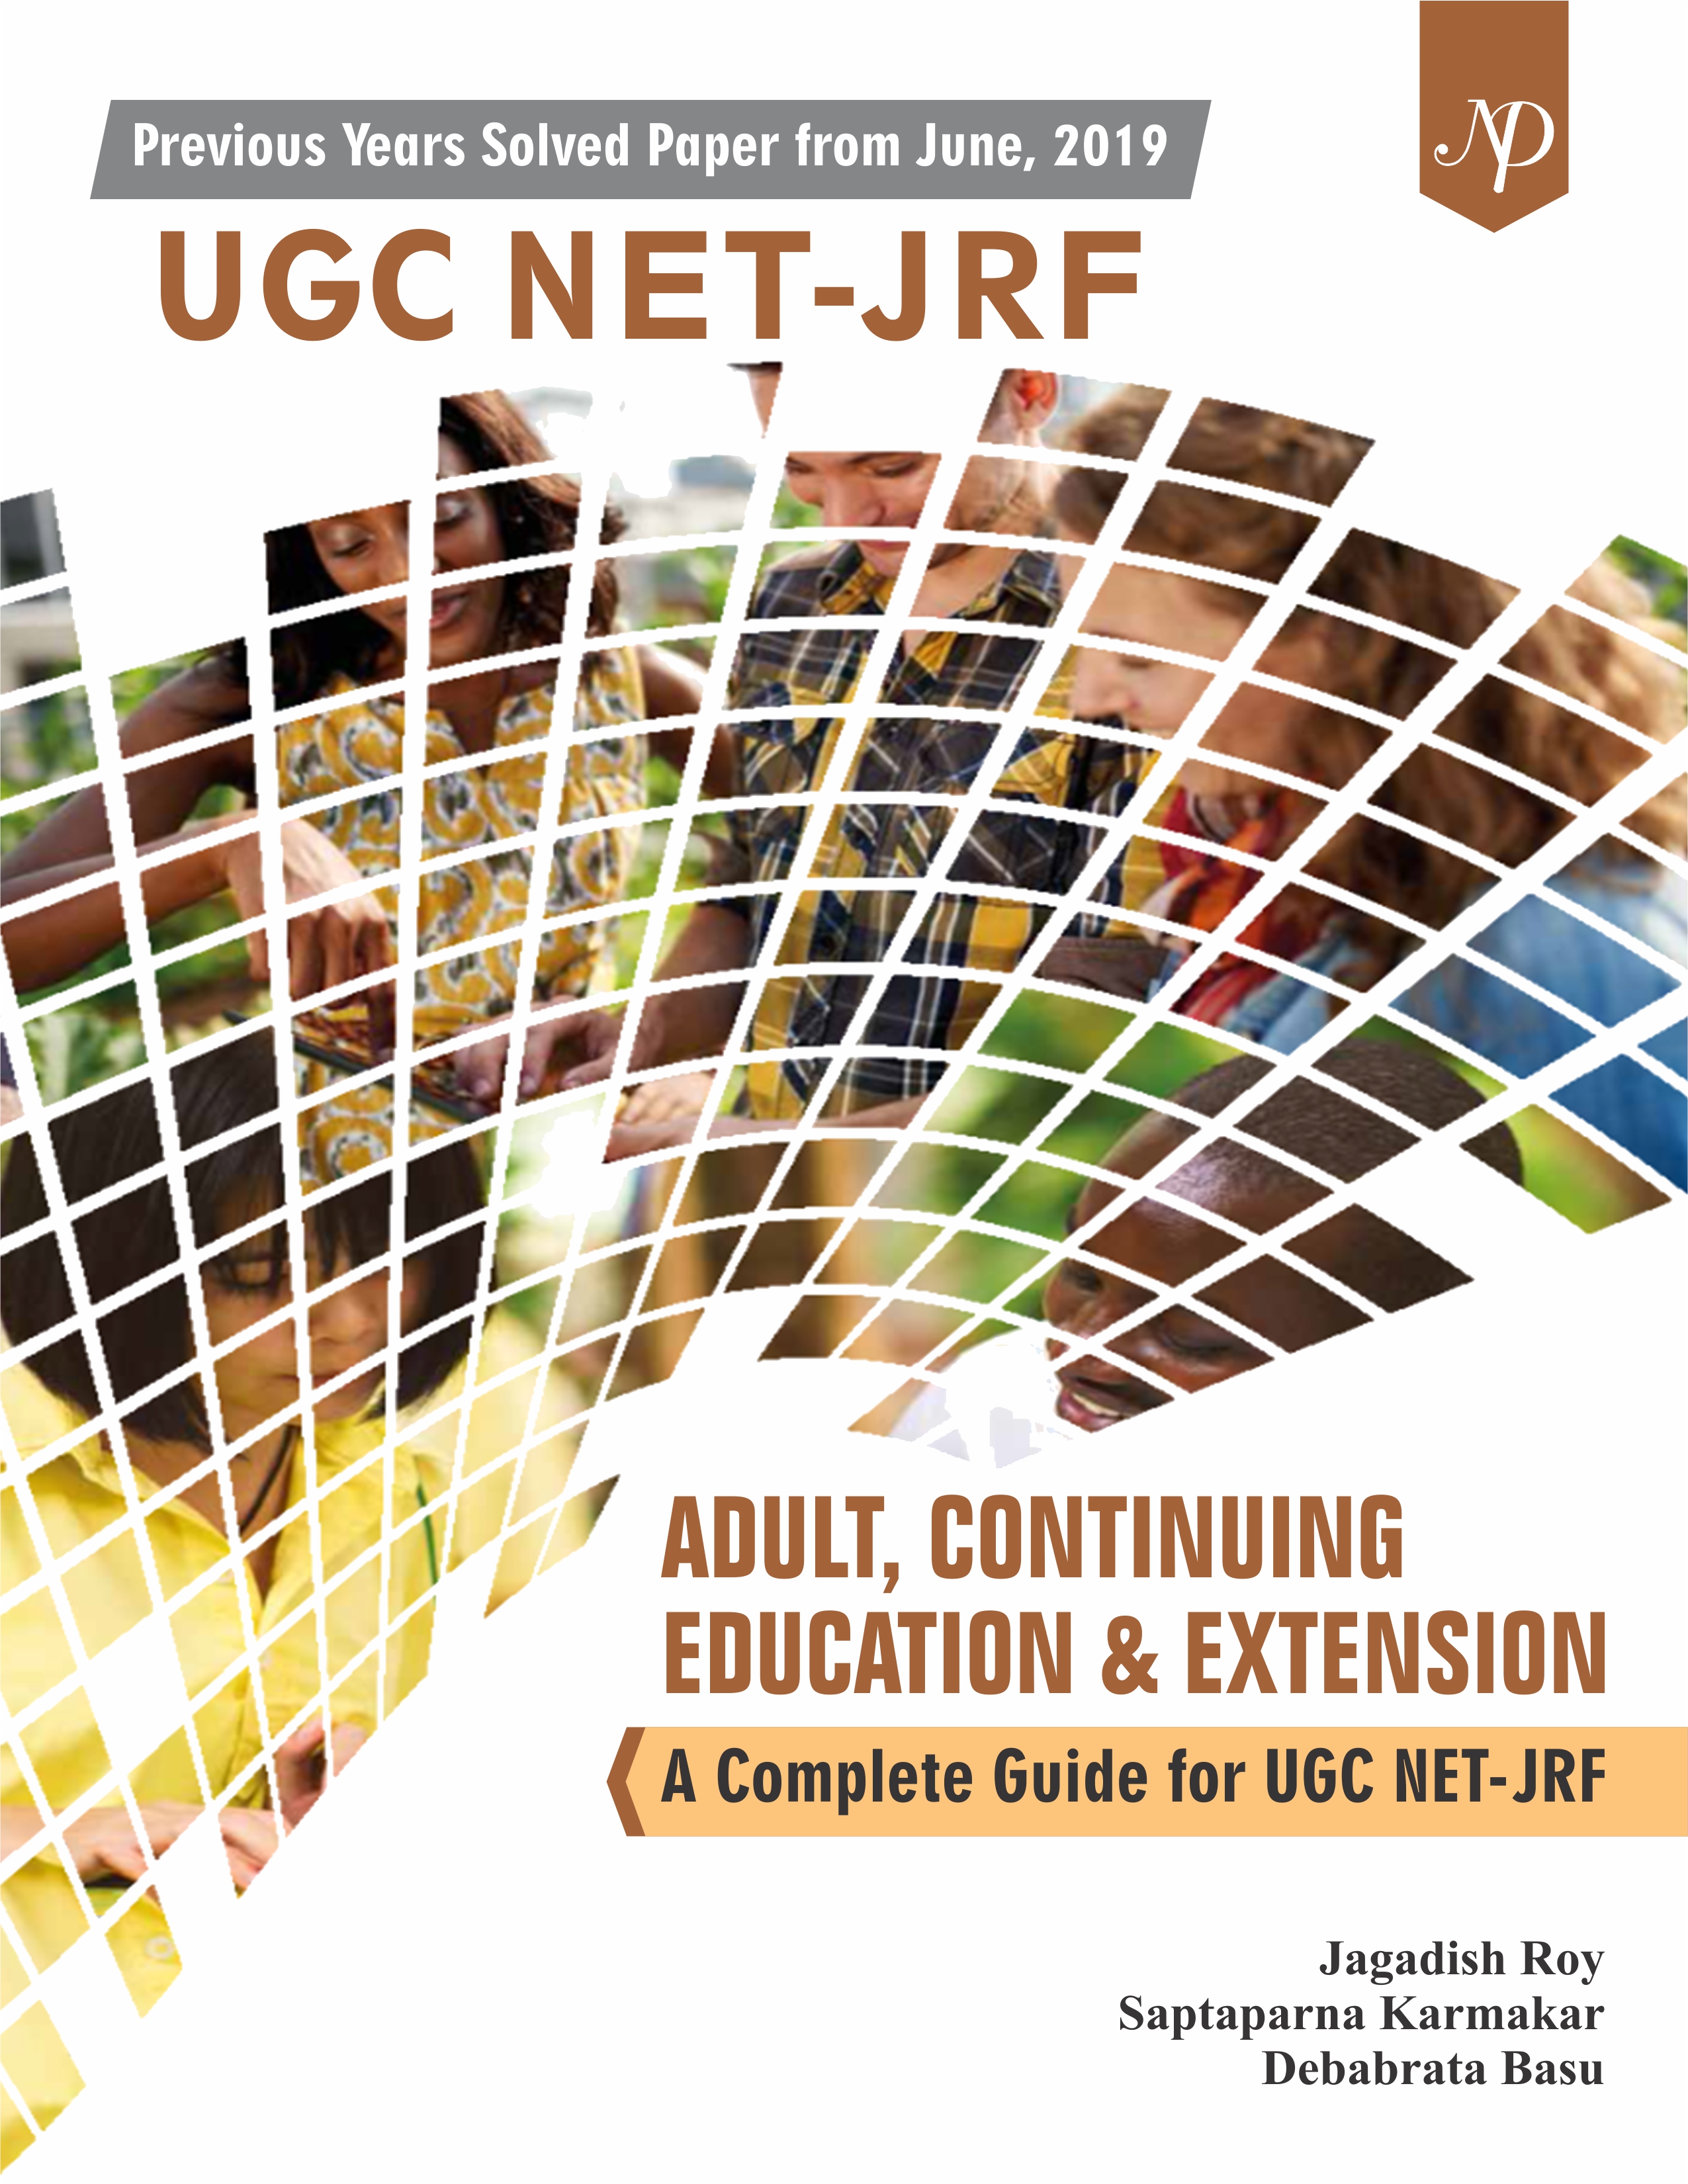 Adult Continuing Educaion UGC NET-JRF Cover Page.jpg